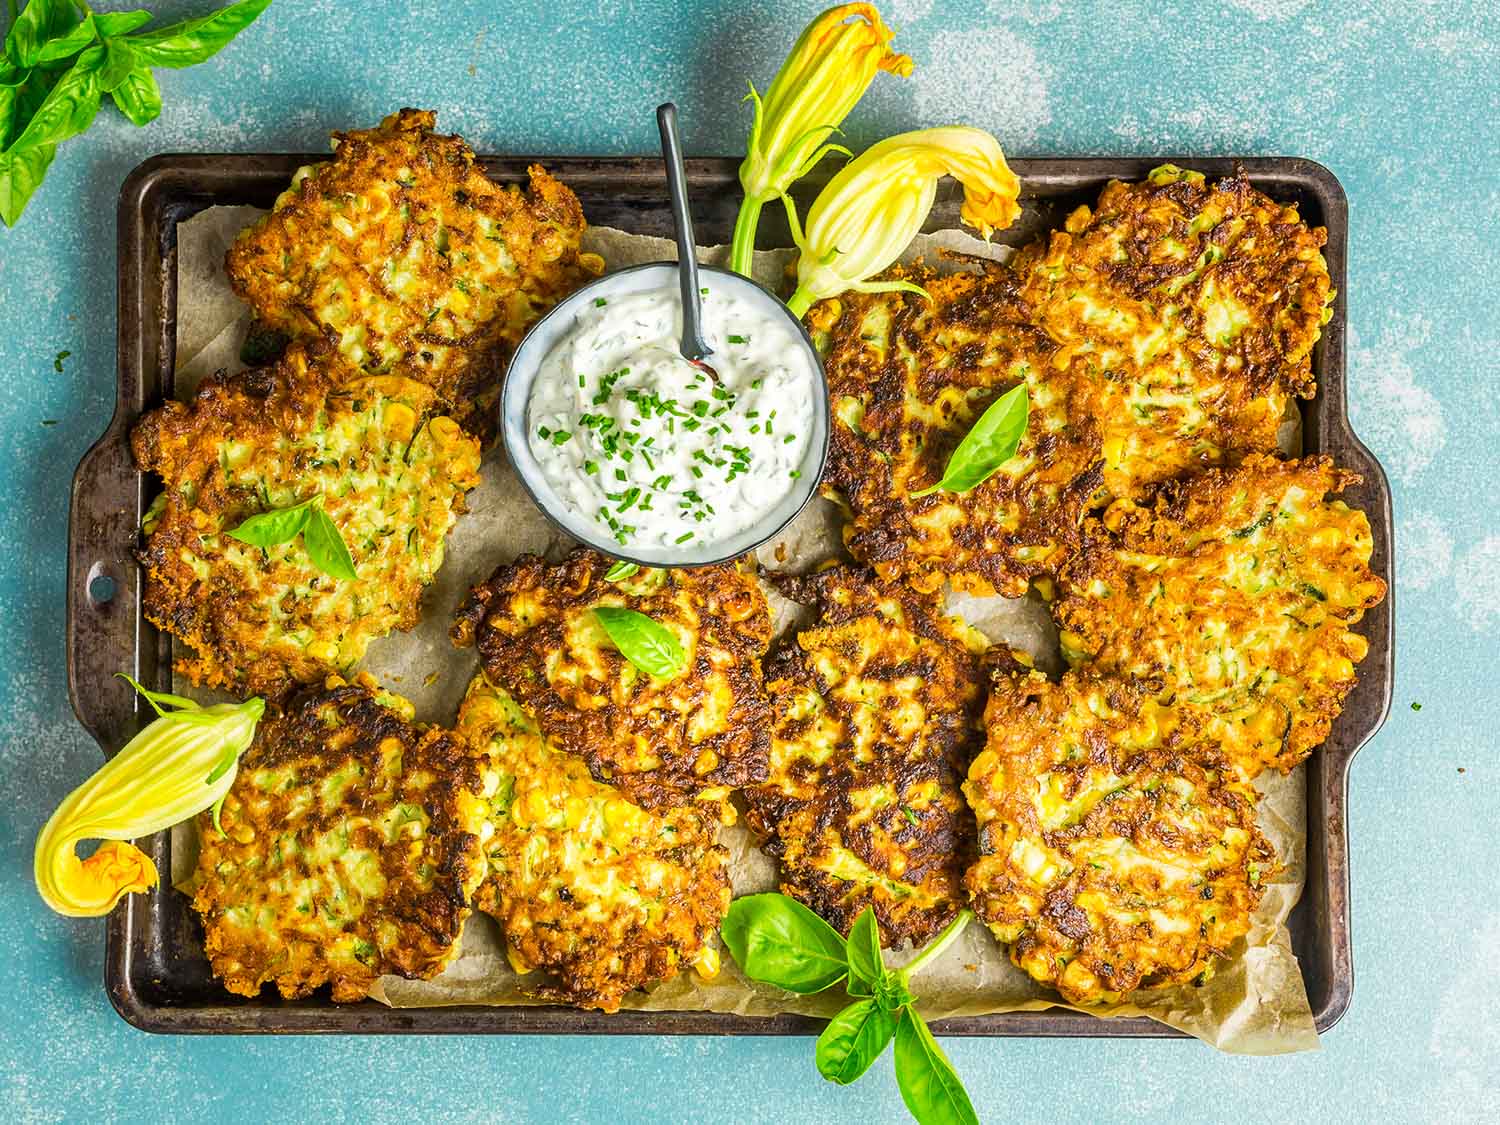 Zucchini-and-Corn Fritters With Herb Sour Cream